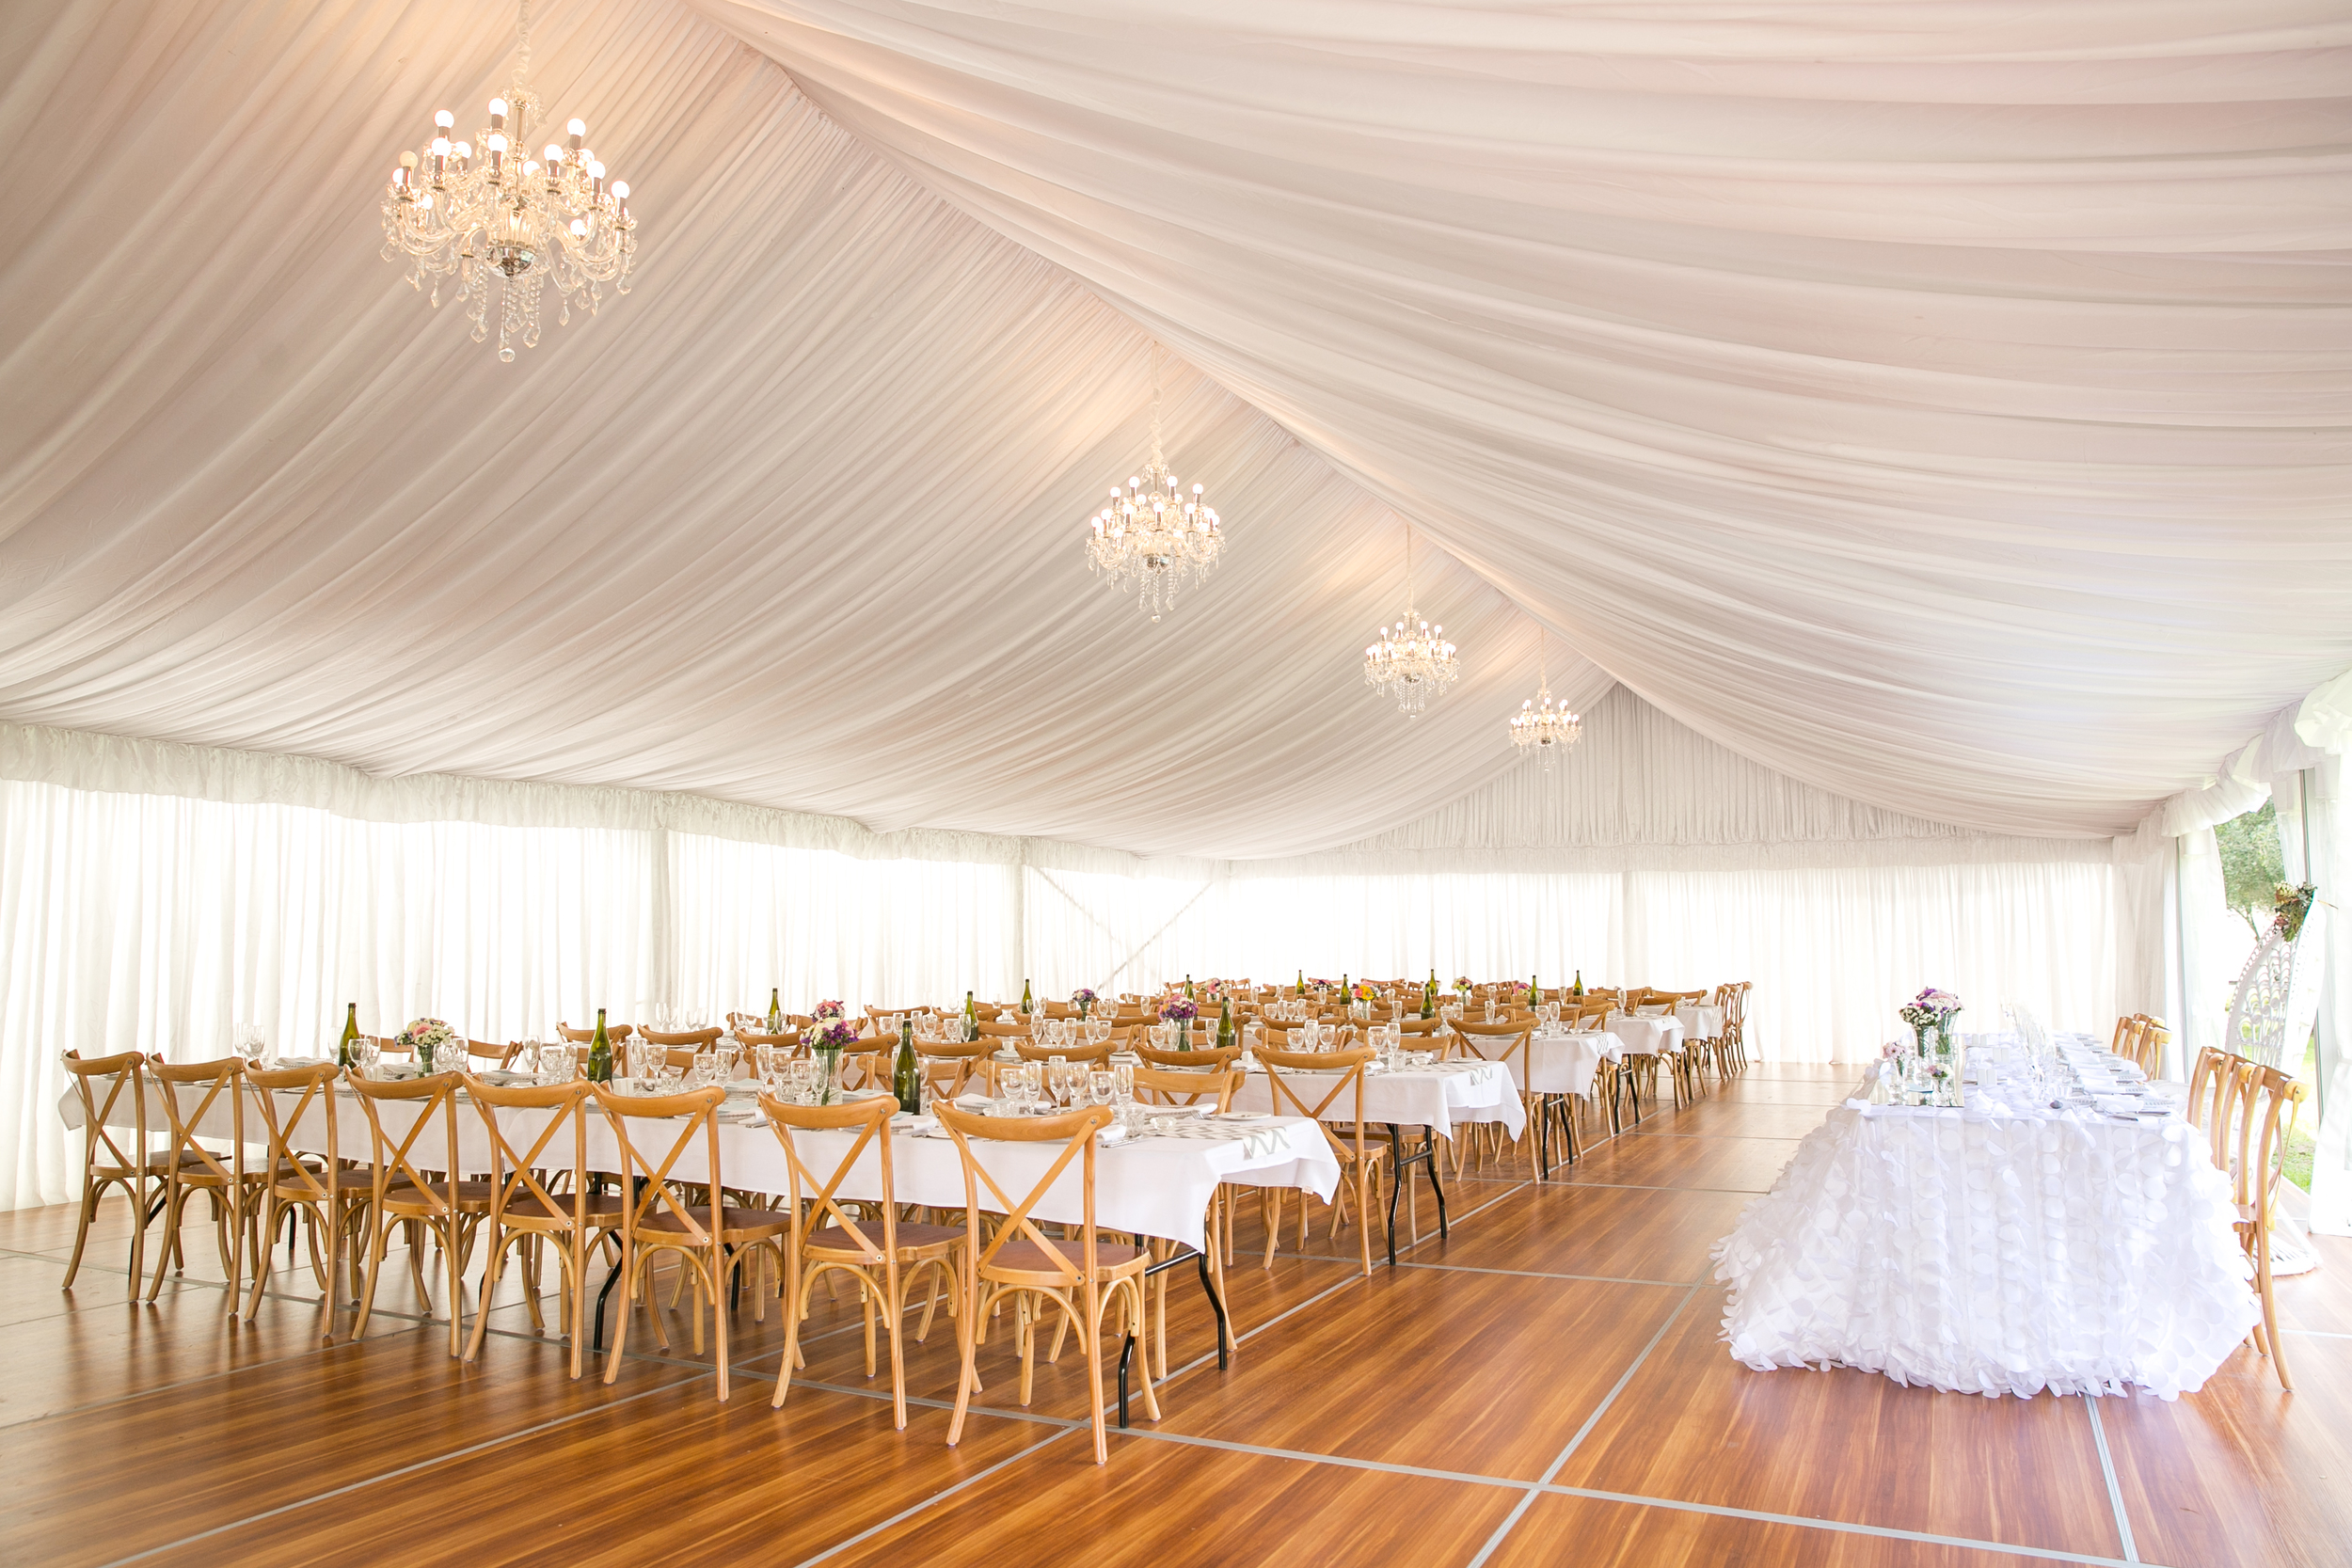 O'Reilly's Canungra Valley Vineyards Marquee.jpg